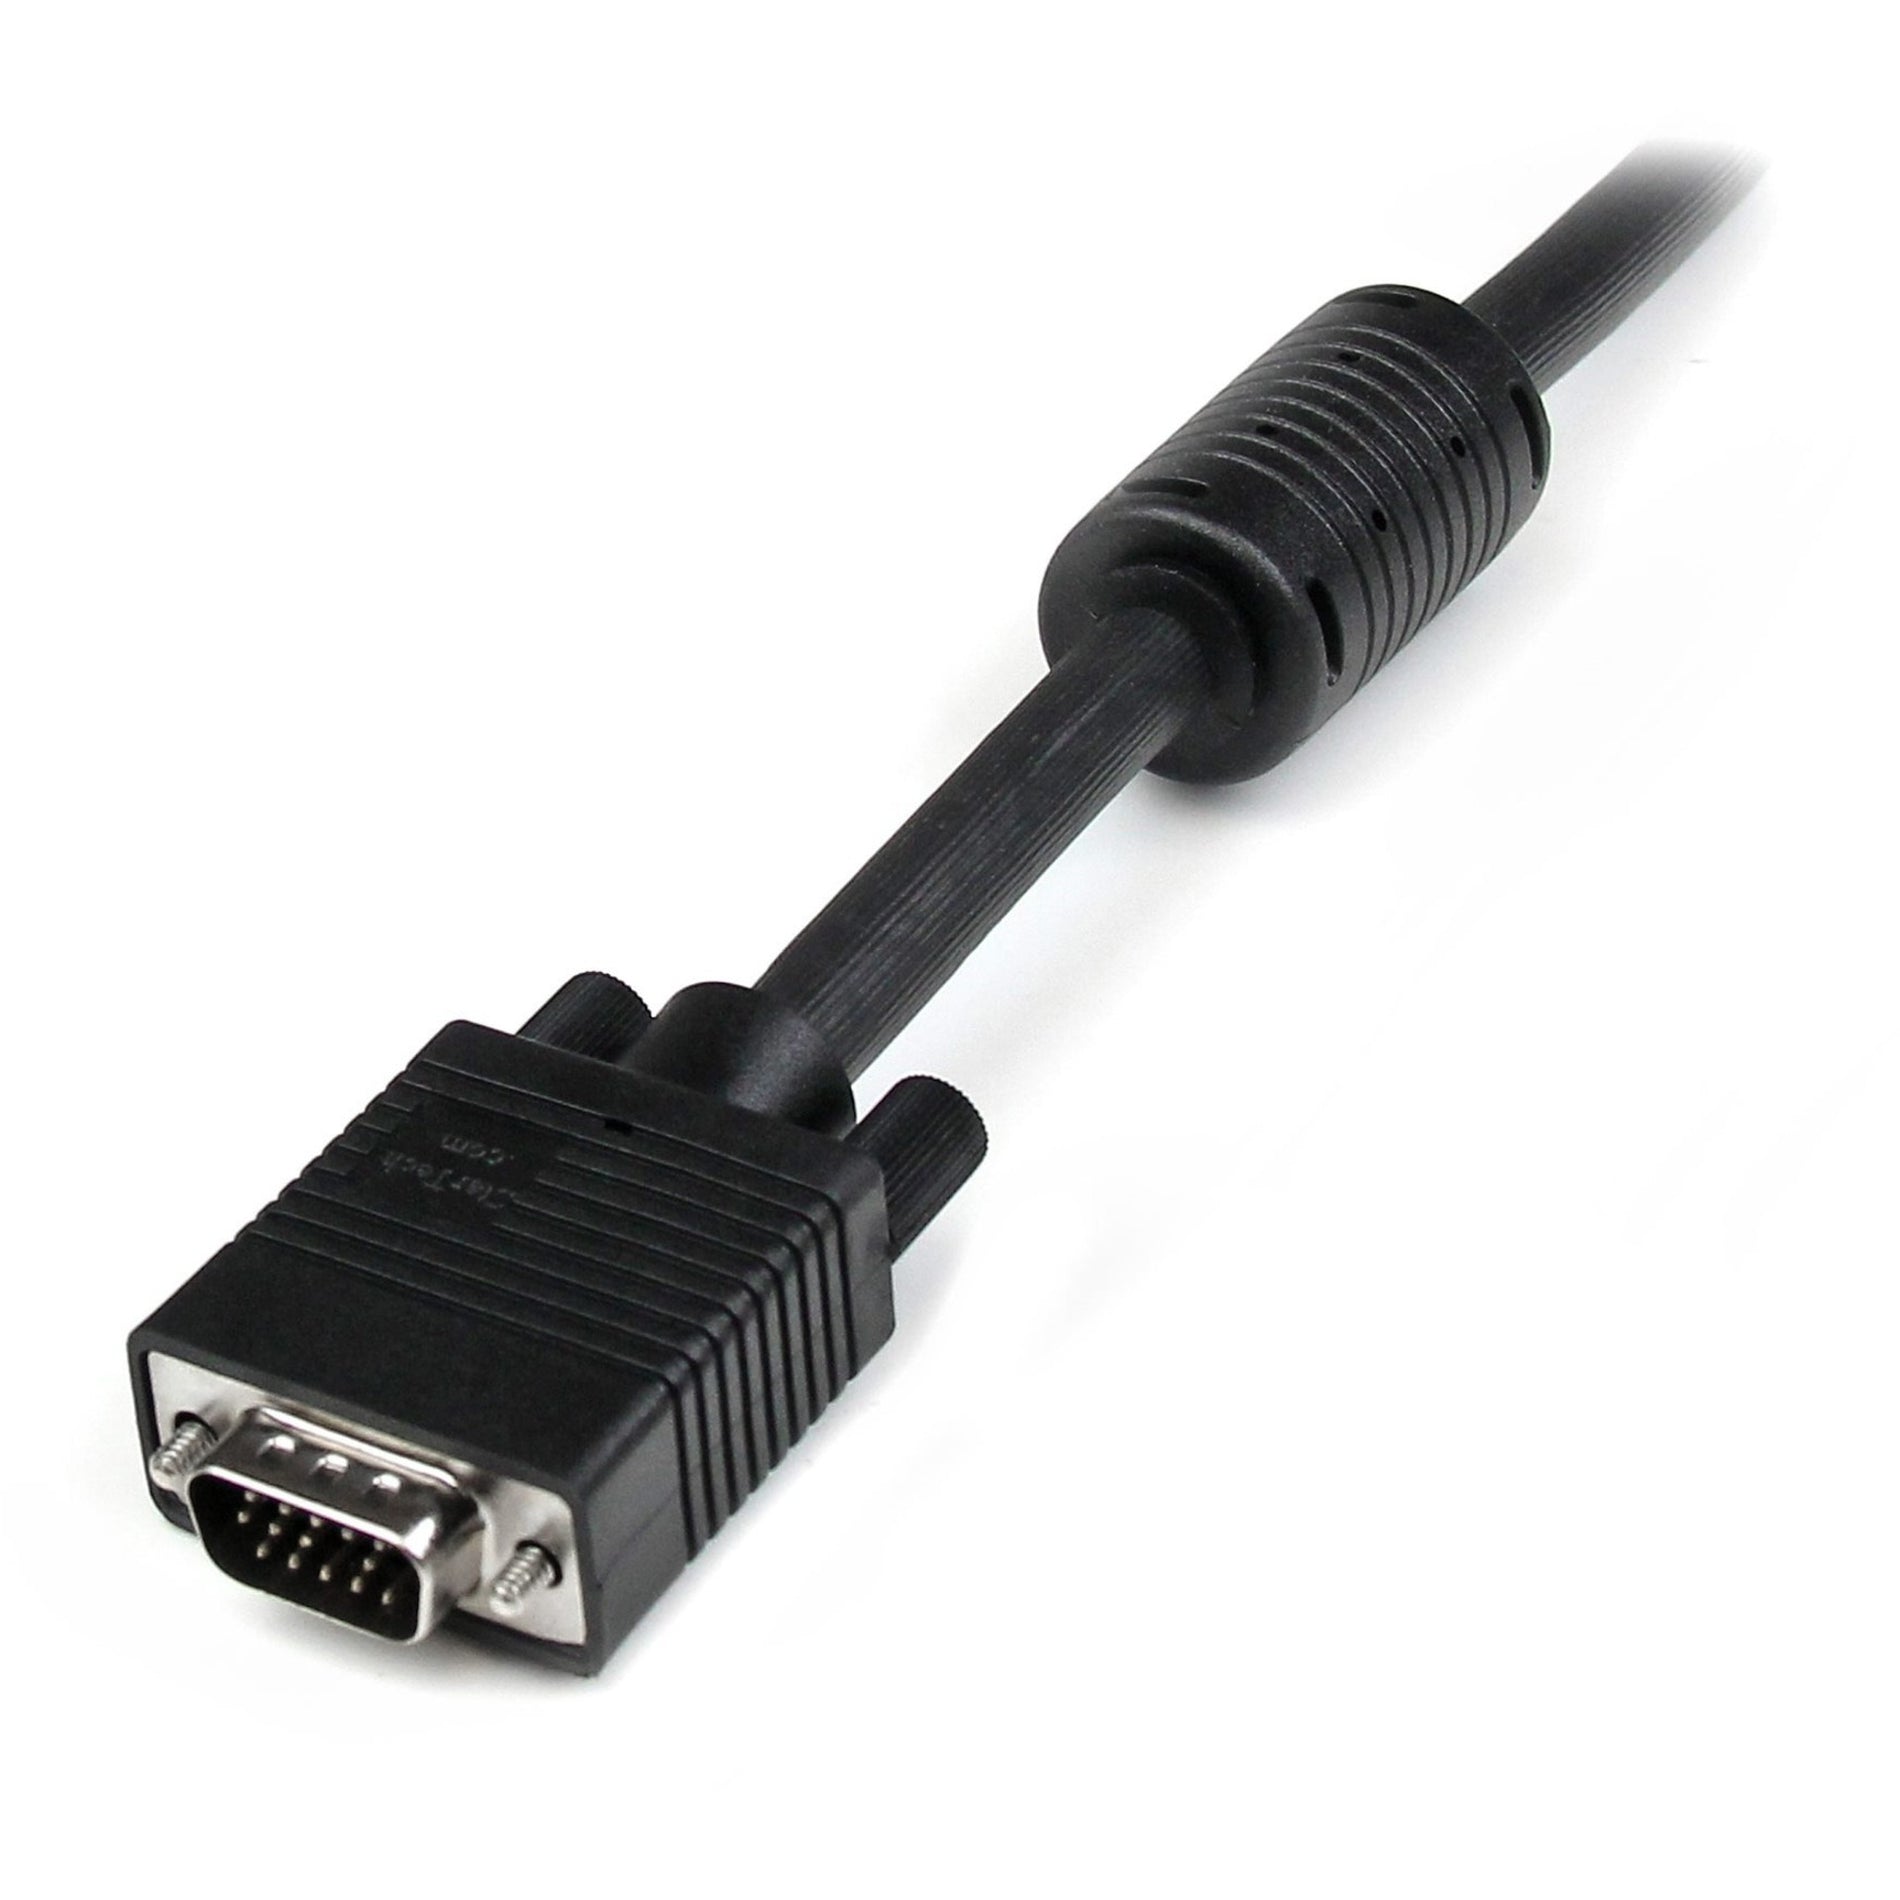 StarTech.com MXT101MMHQ25 Coax High Resolution Monitor VGA Cable, 25 ft, Crystal Clear Display